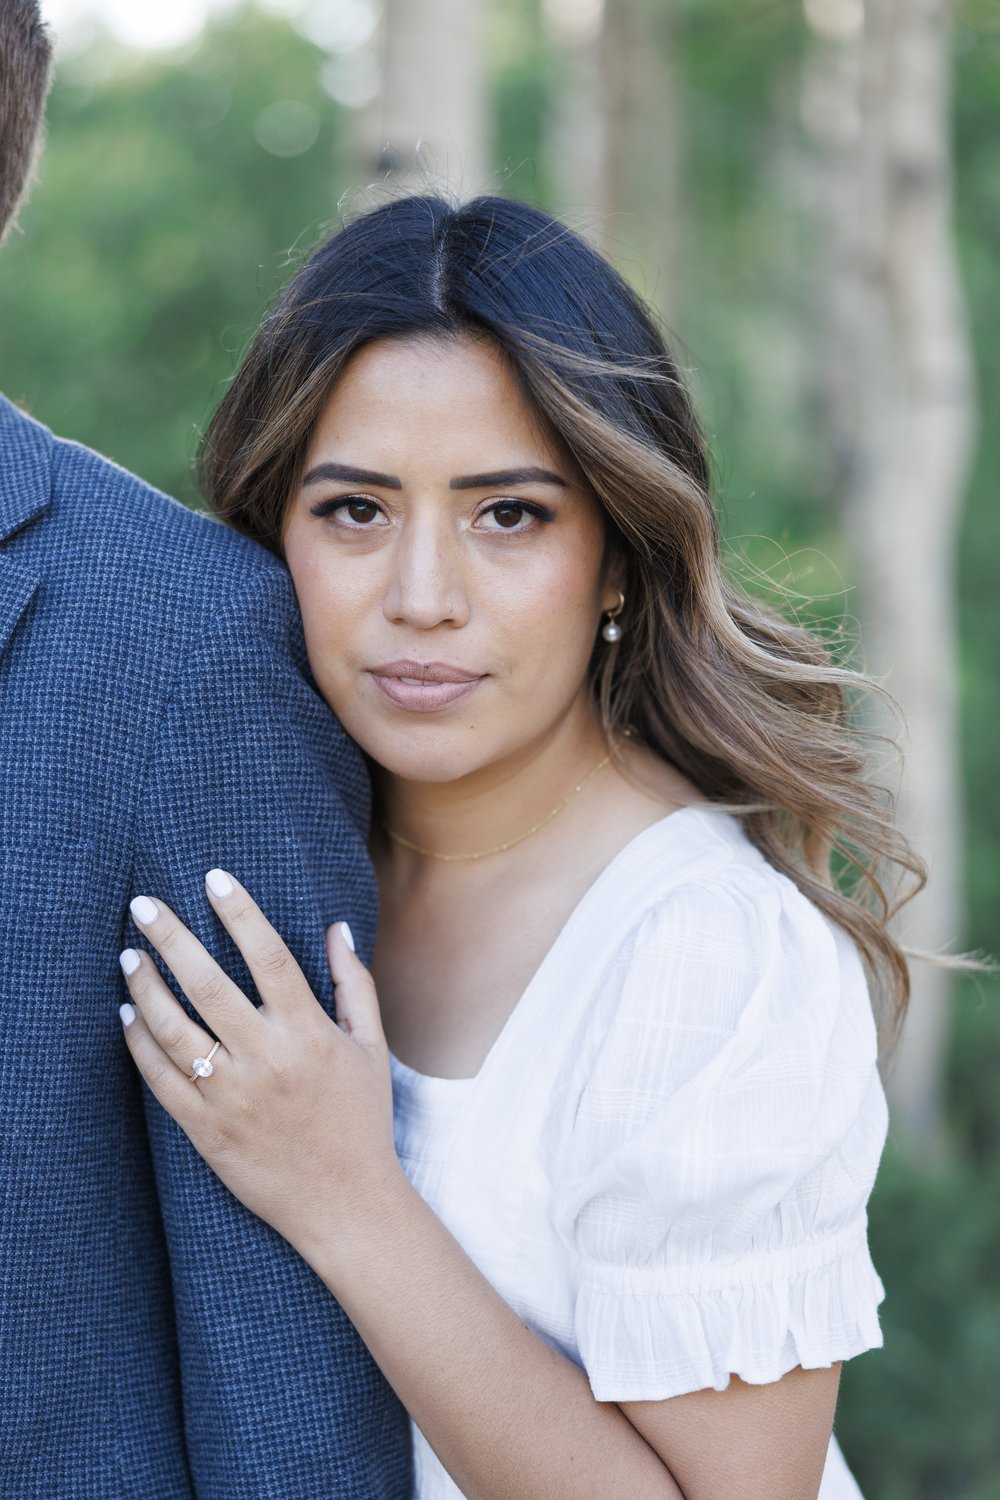  A woman with her hand on her fiance's arm showing off her wedding ring was captured by Savanna Richardson Photography. ritzy photographer in Utah #ParkCityEngagements #ParkCityPhotographers #SavannaRichardsonPhotography #SavannaRichardsonEngagements